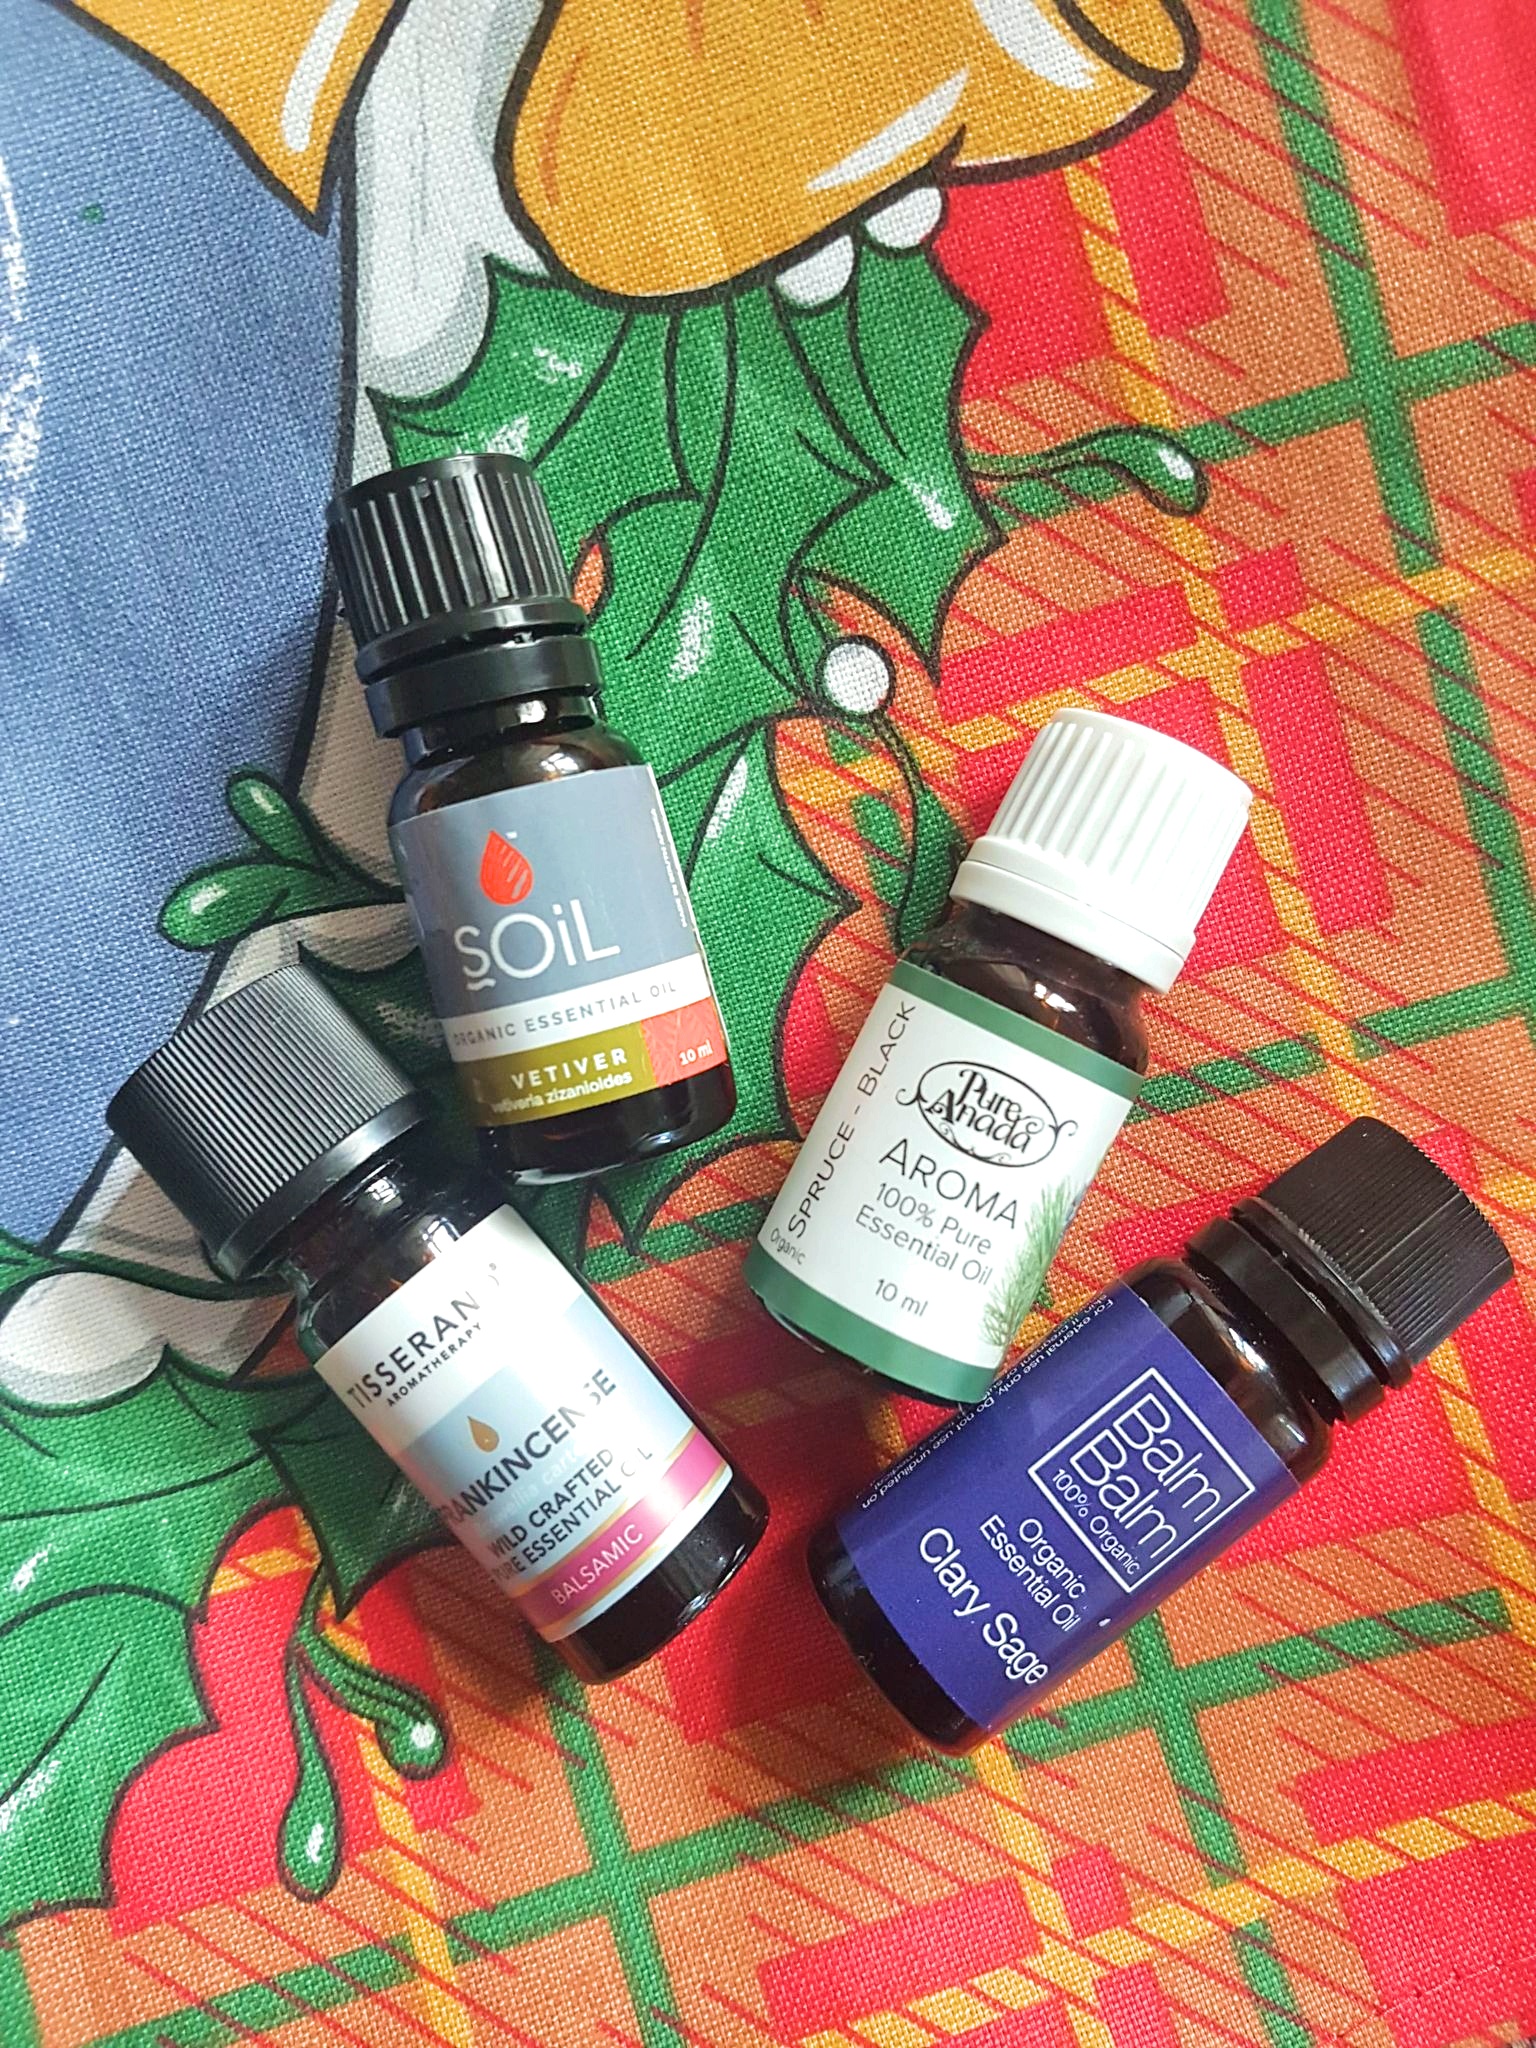 Holiday Essential Oils: 6 More Winter Diffuser Blends - The ecoLogical